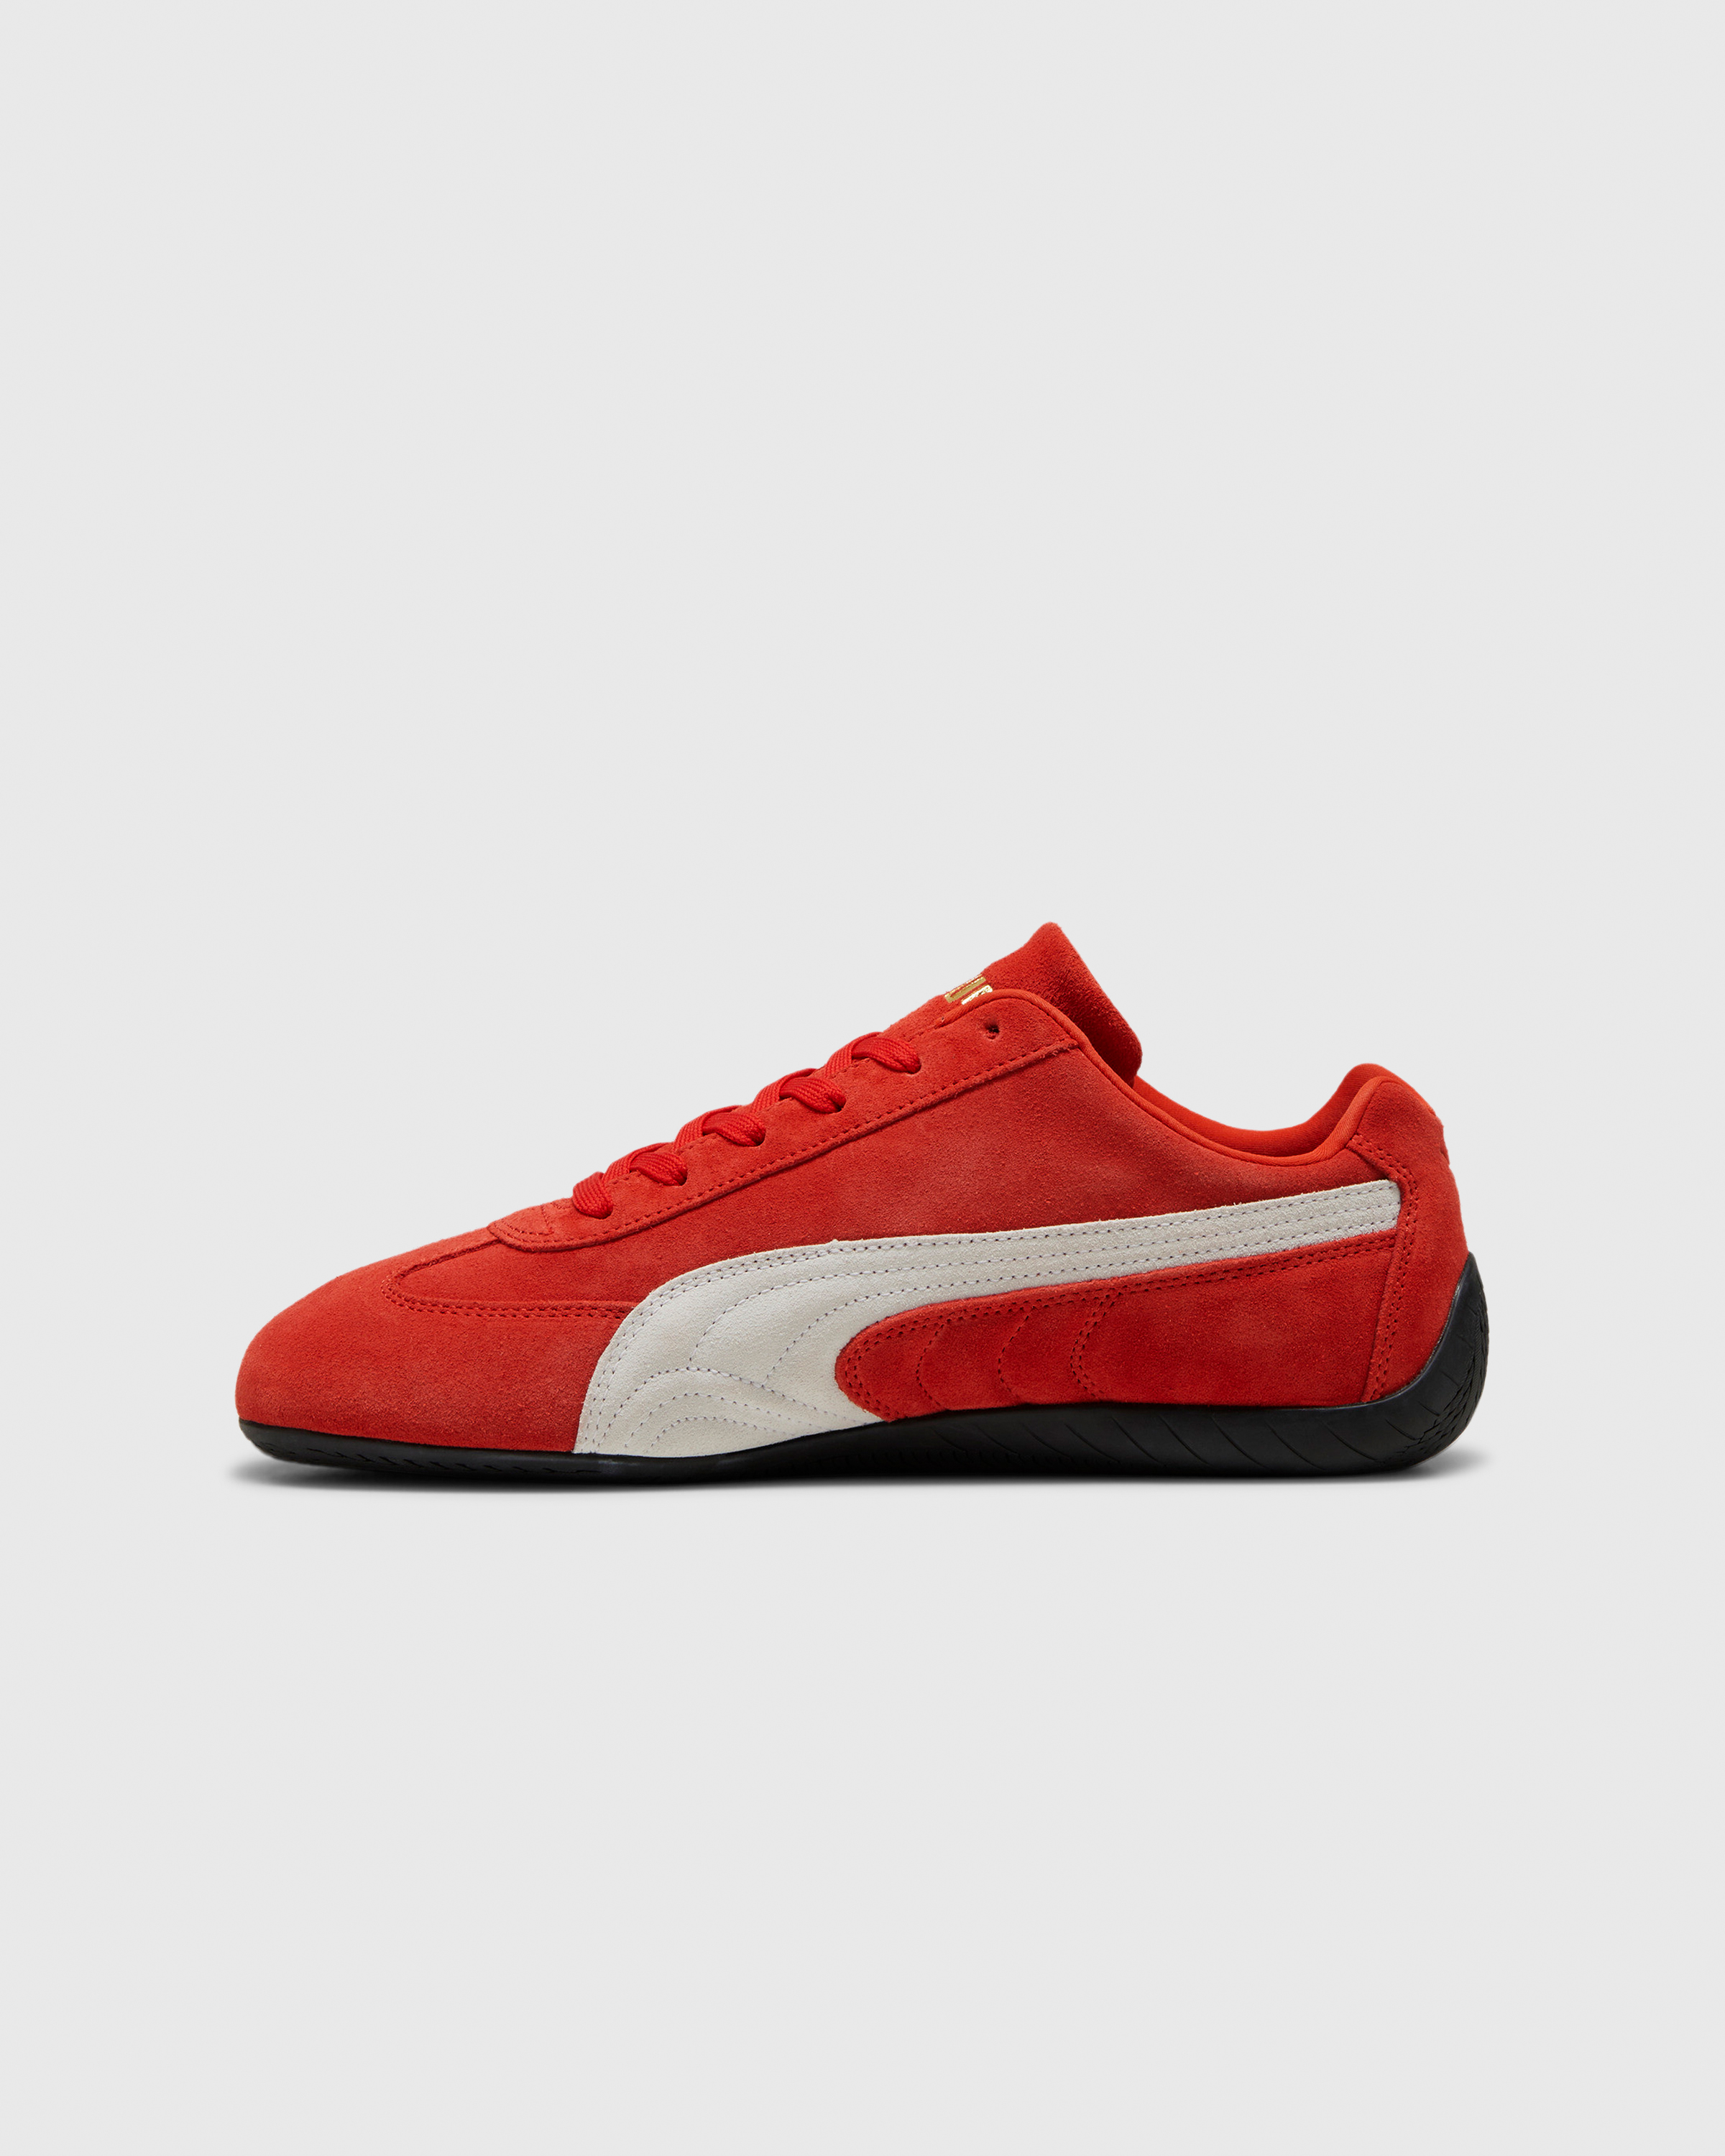 Puma – Speedcat OG Red/White - Low Top Sneakers - Red - Image 2